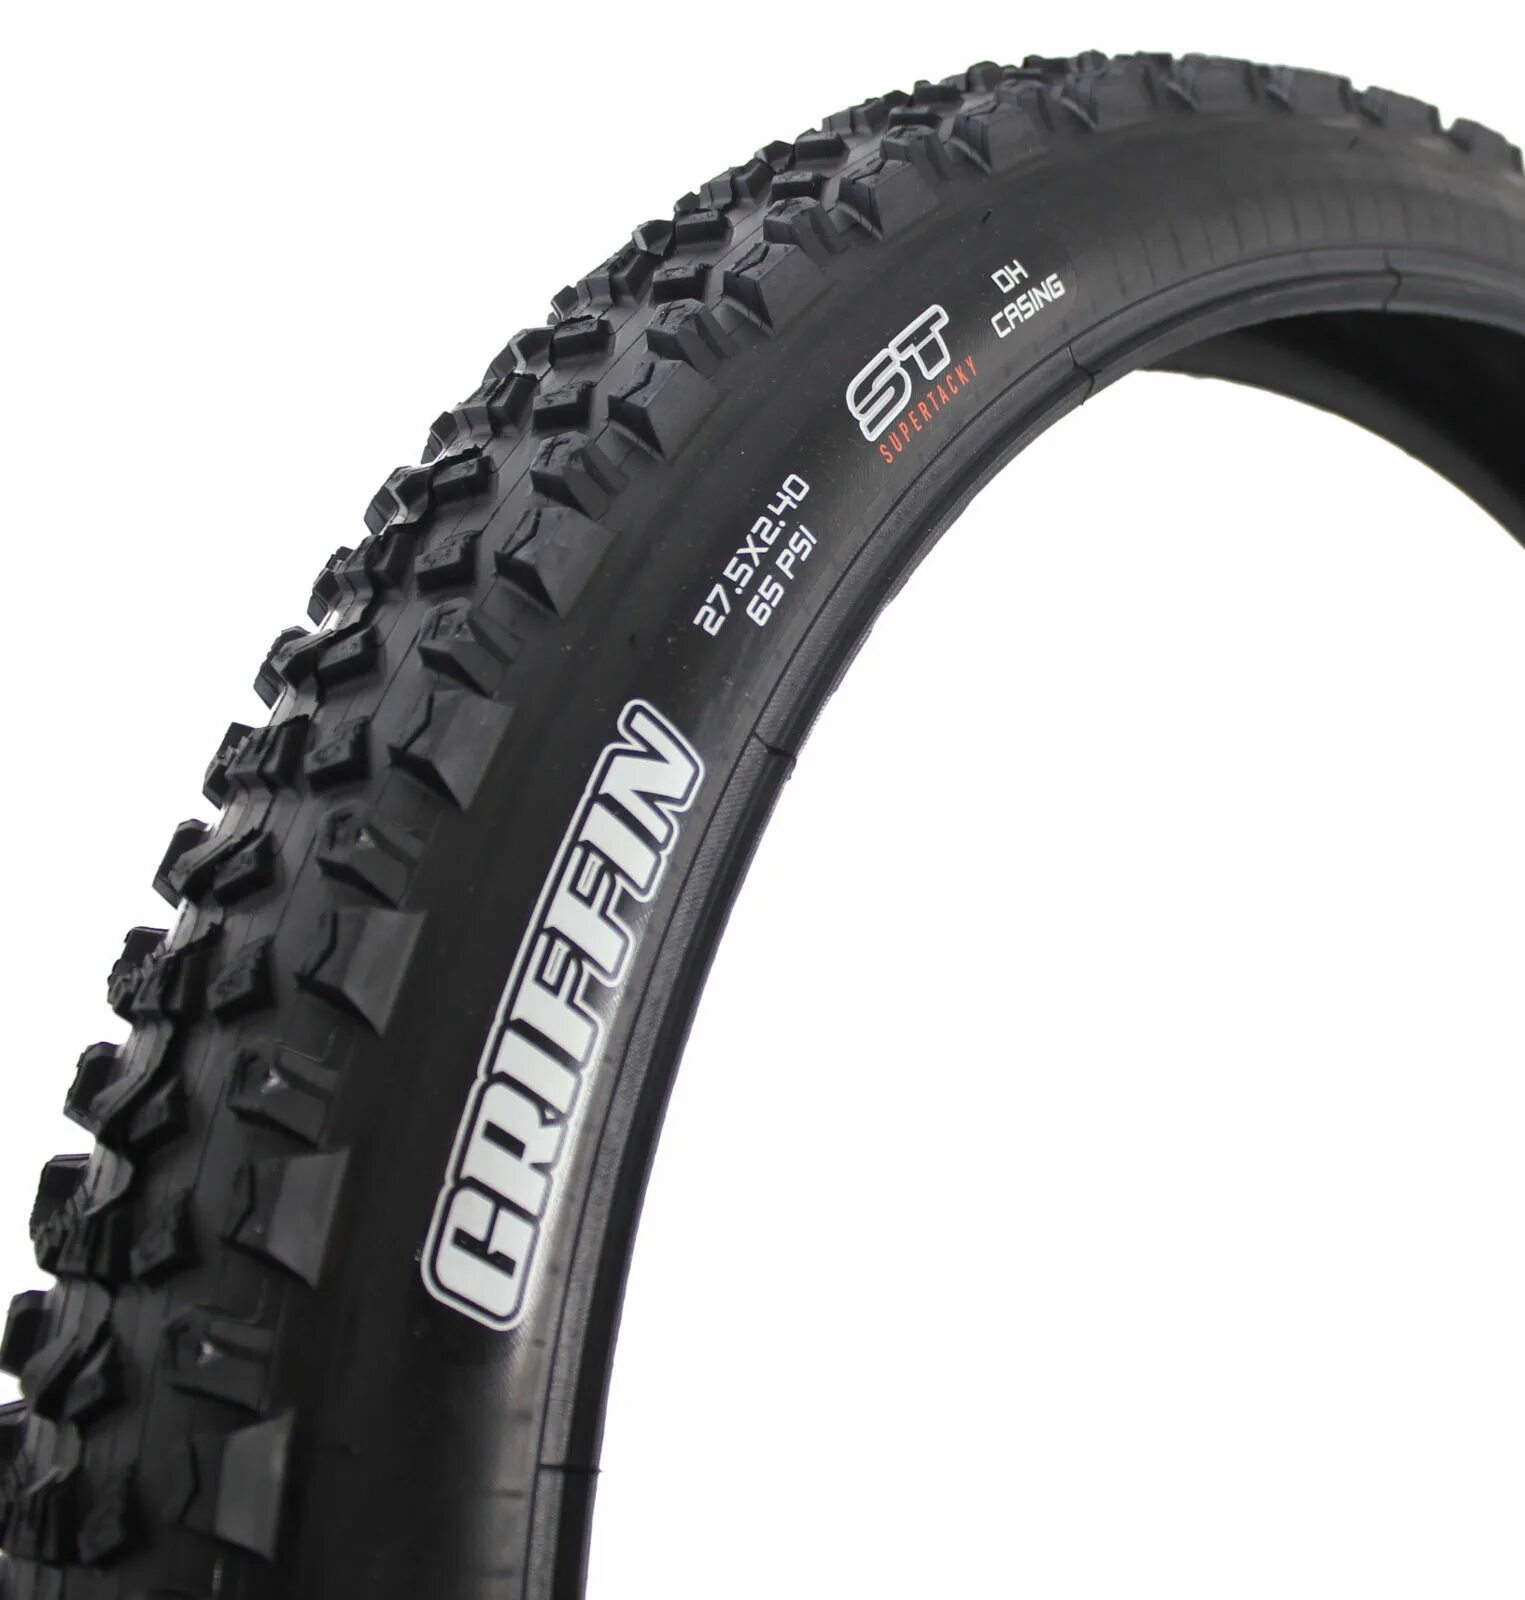 Maxxis Griffin 26 2.4. Maxxis Griffin DH. Покрышки Максис 26 DH. Покрышки Maxxis 27.5. Шины maxxis sport 5 отзывы